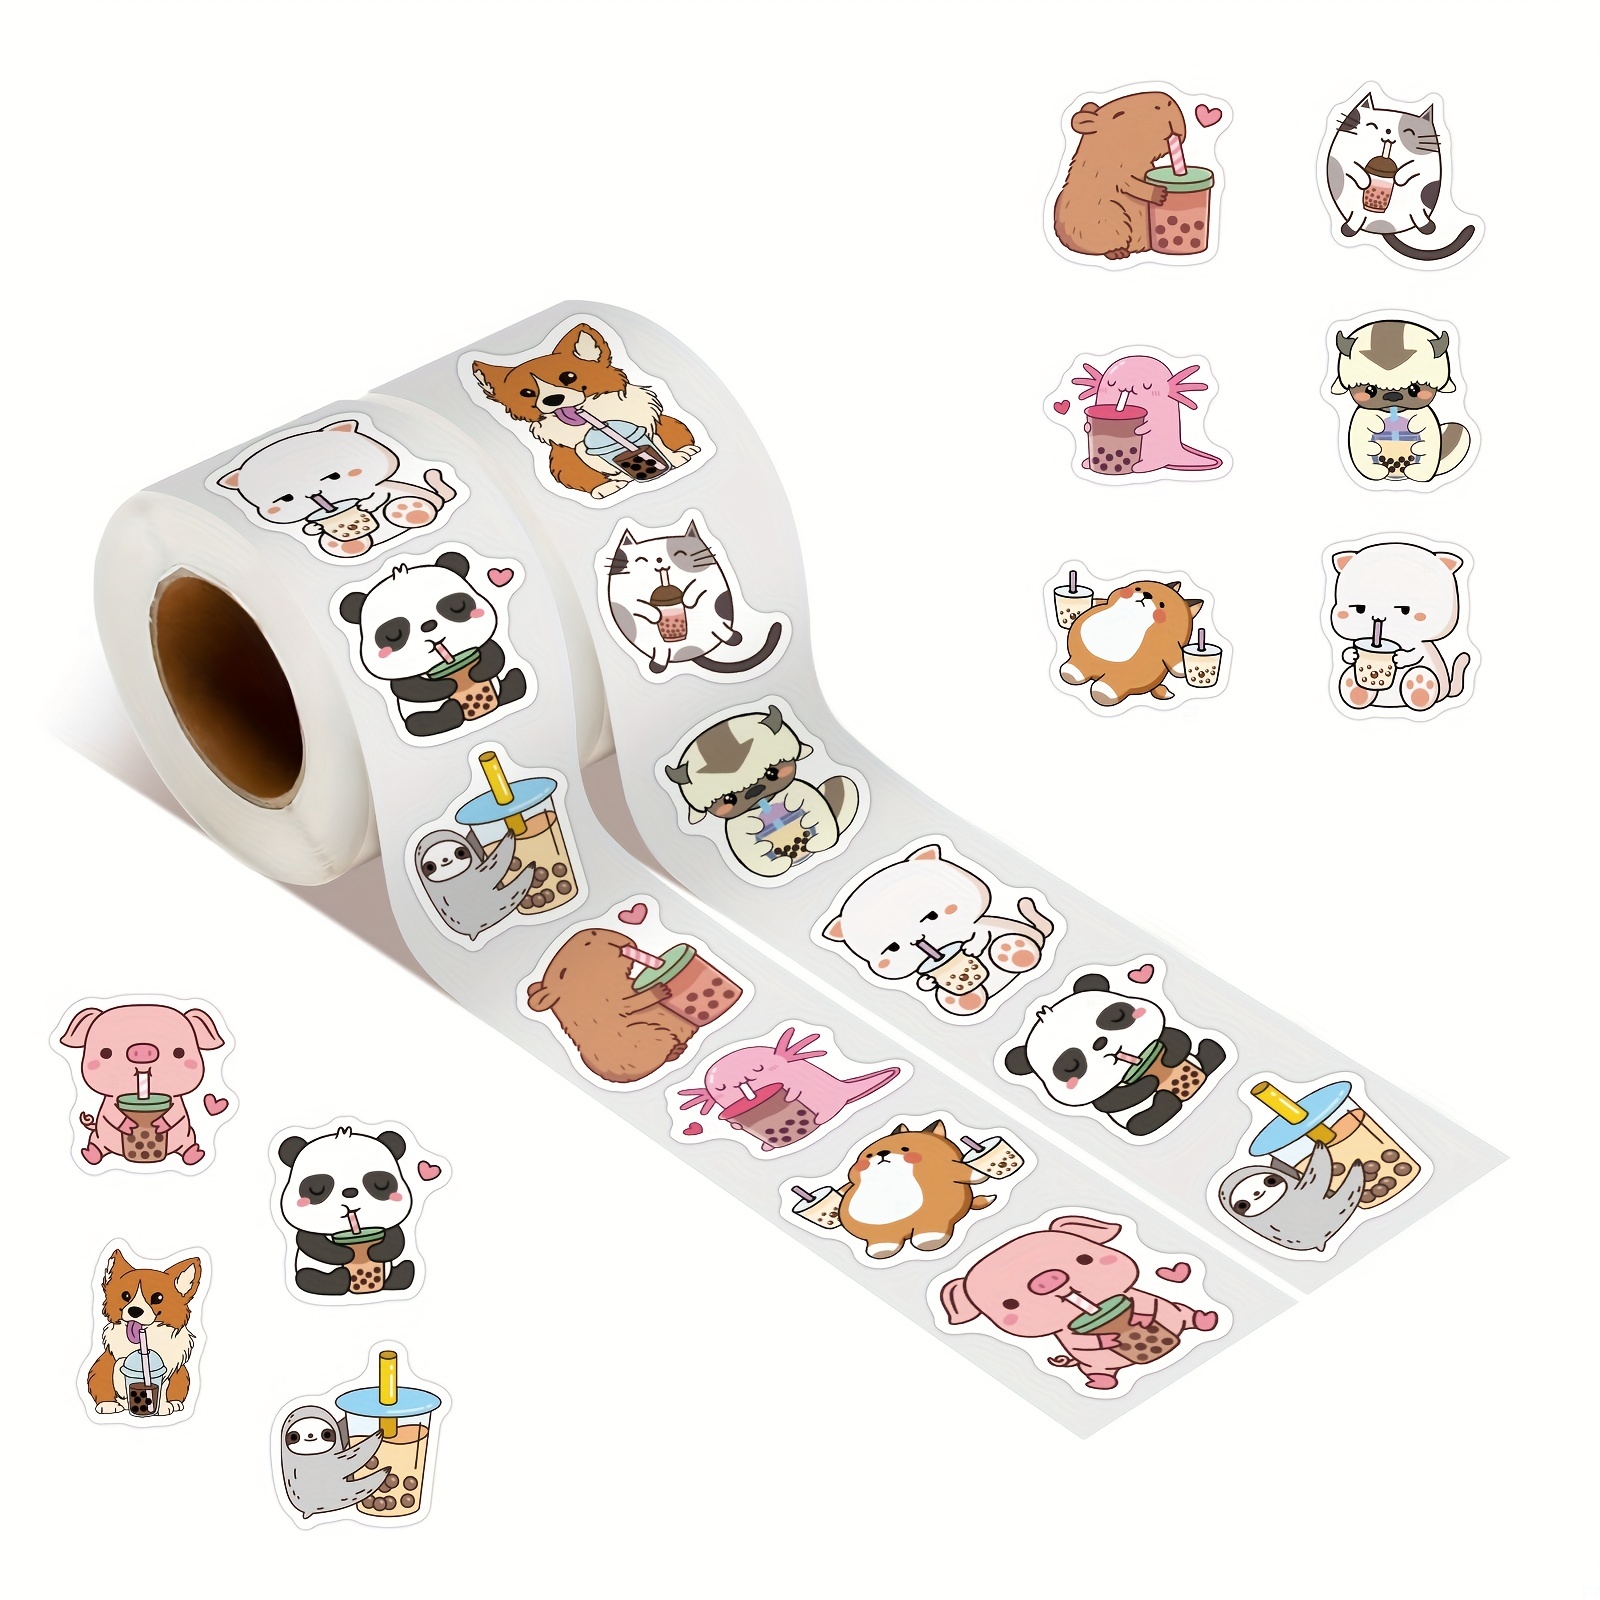 

500pcs Cute Bubble Tea Stickers Roll - Kawaii Drink Decals For Phone, Laptop, Water Bottle, Luggage - Perfect Gifts For Teens, Adults